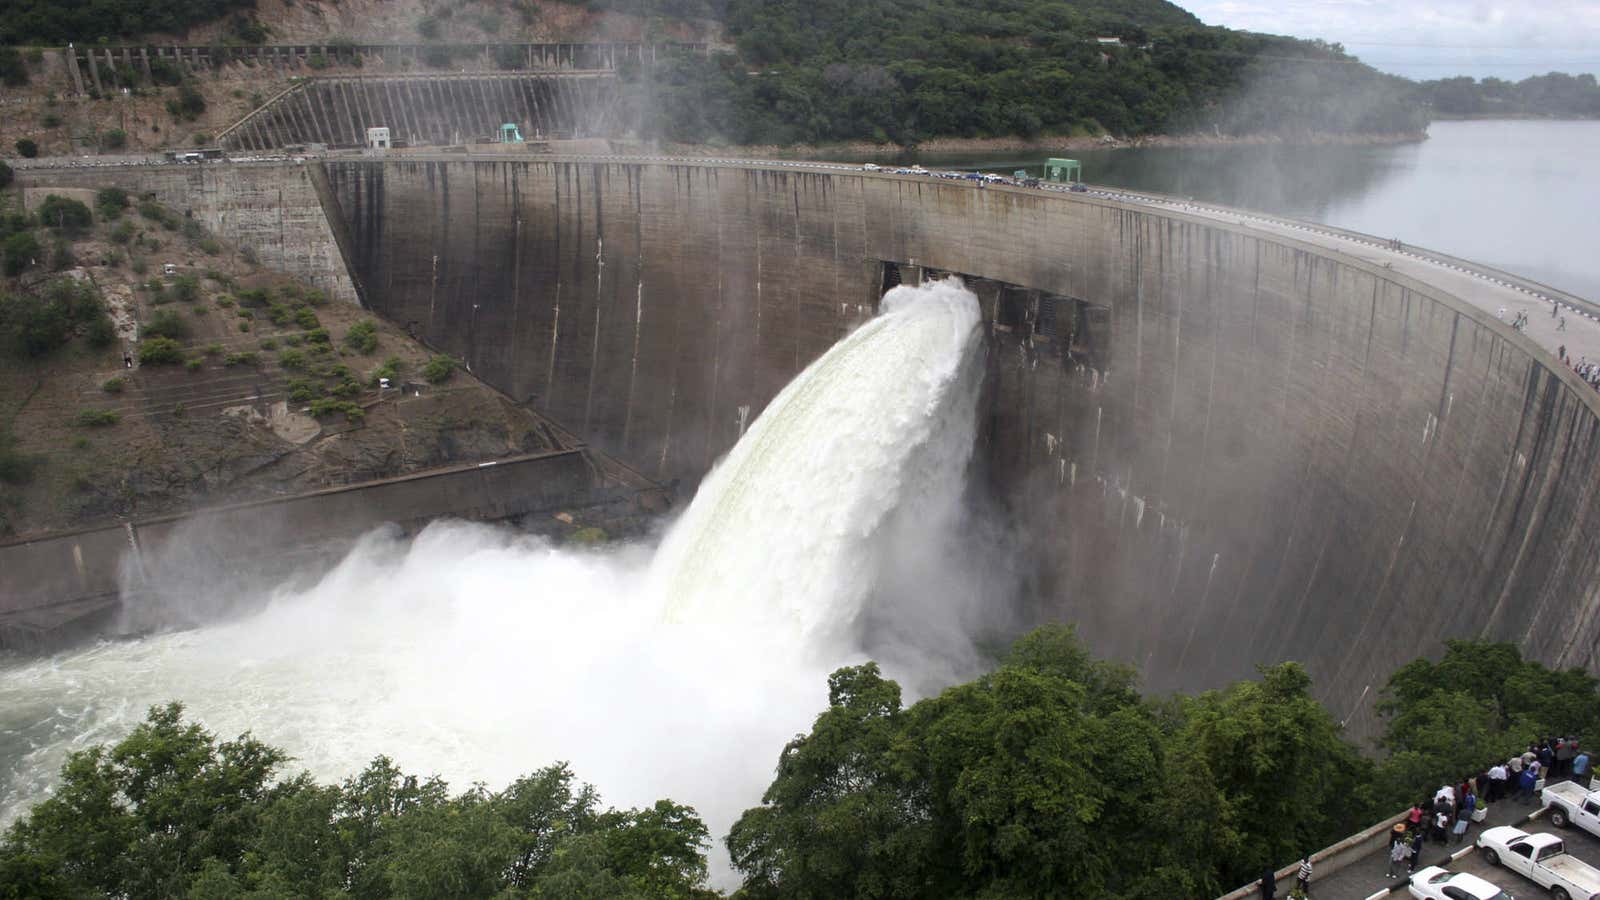 Lake Kariba which is a key source of hydroelectric power supply has been experiencing low water levels.